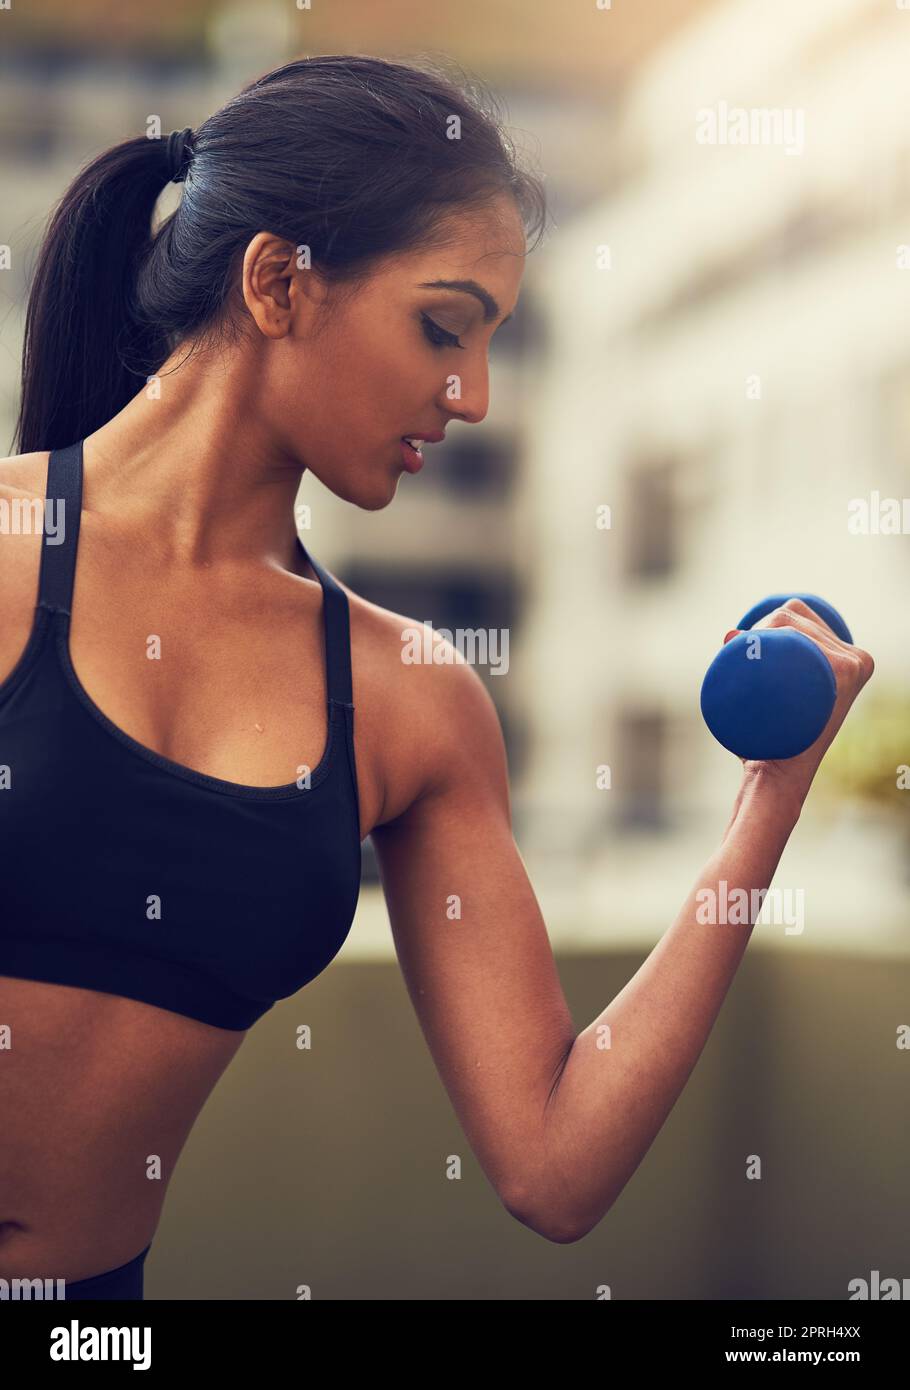 You are only as strong as you think you are. a young woman working out with dumbbells. Stock Photo